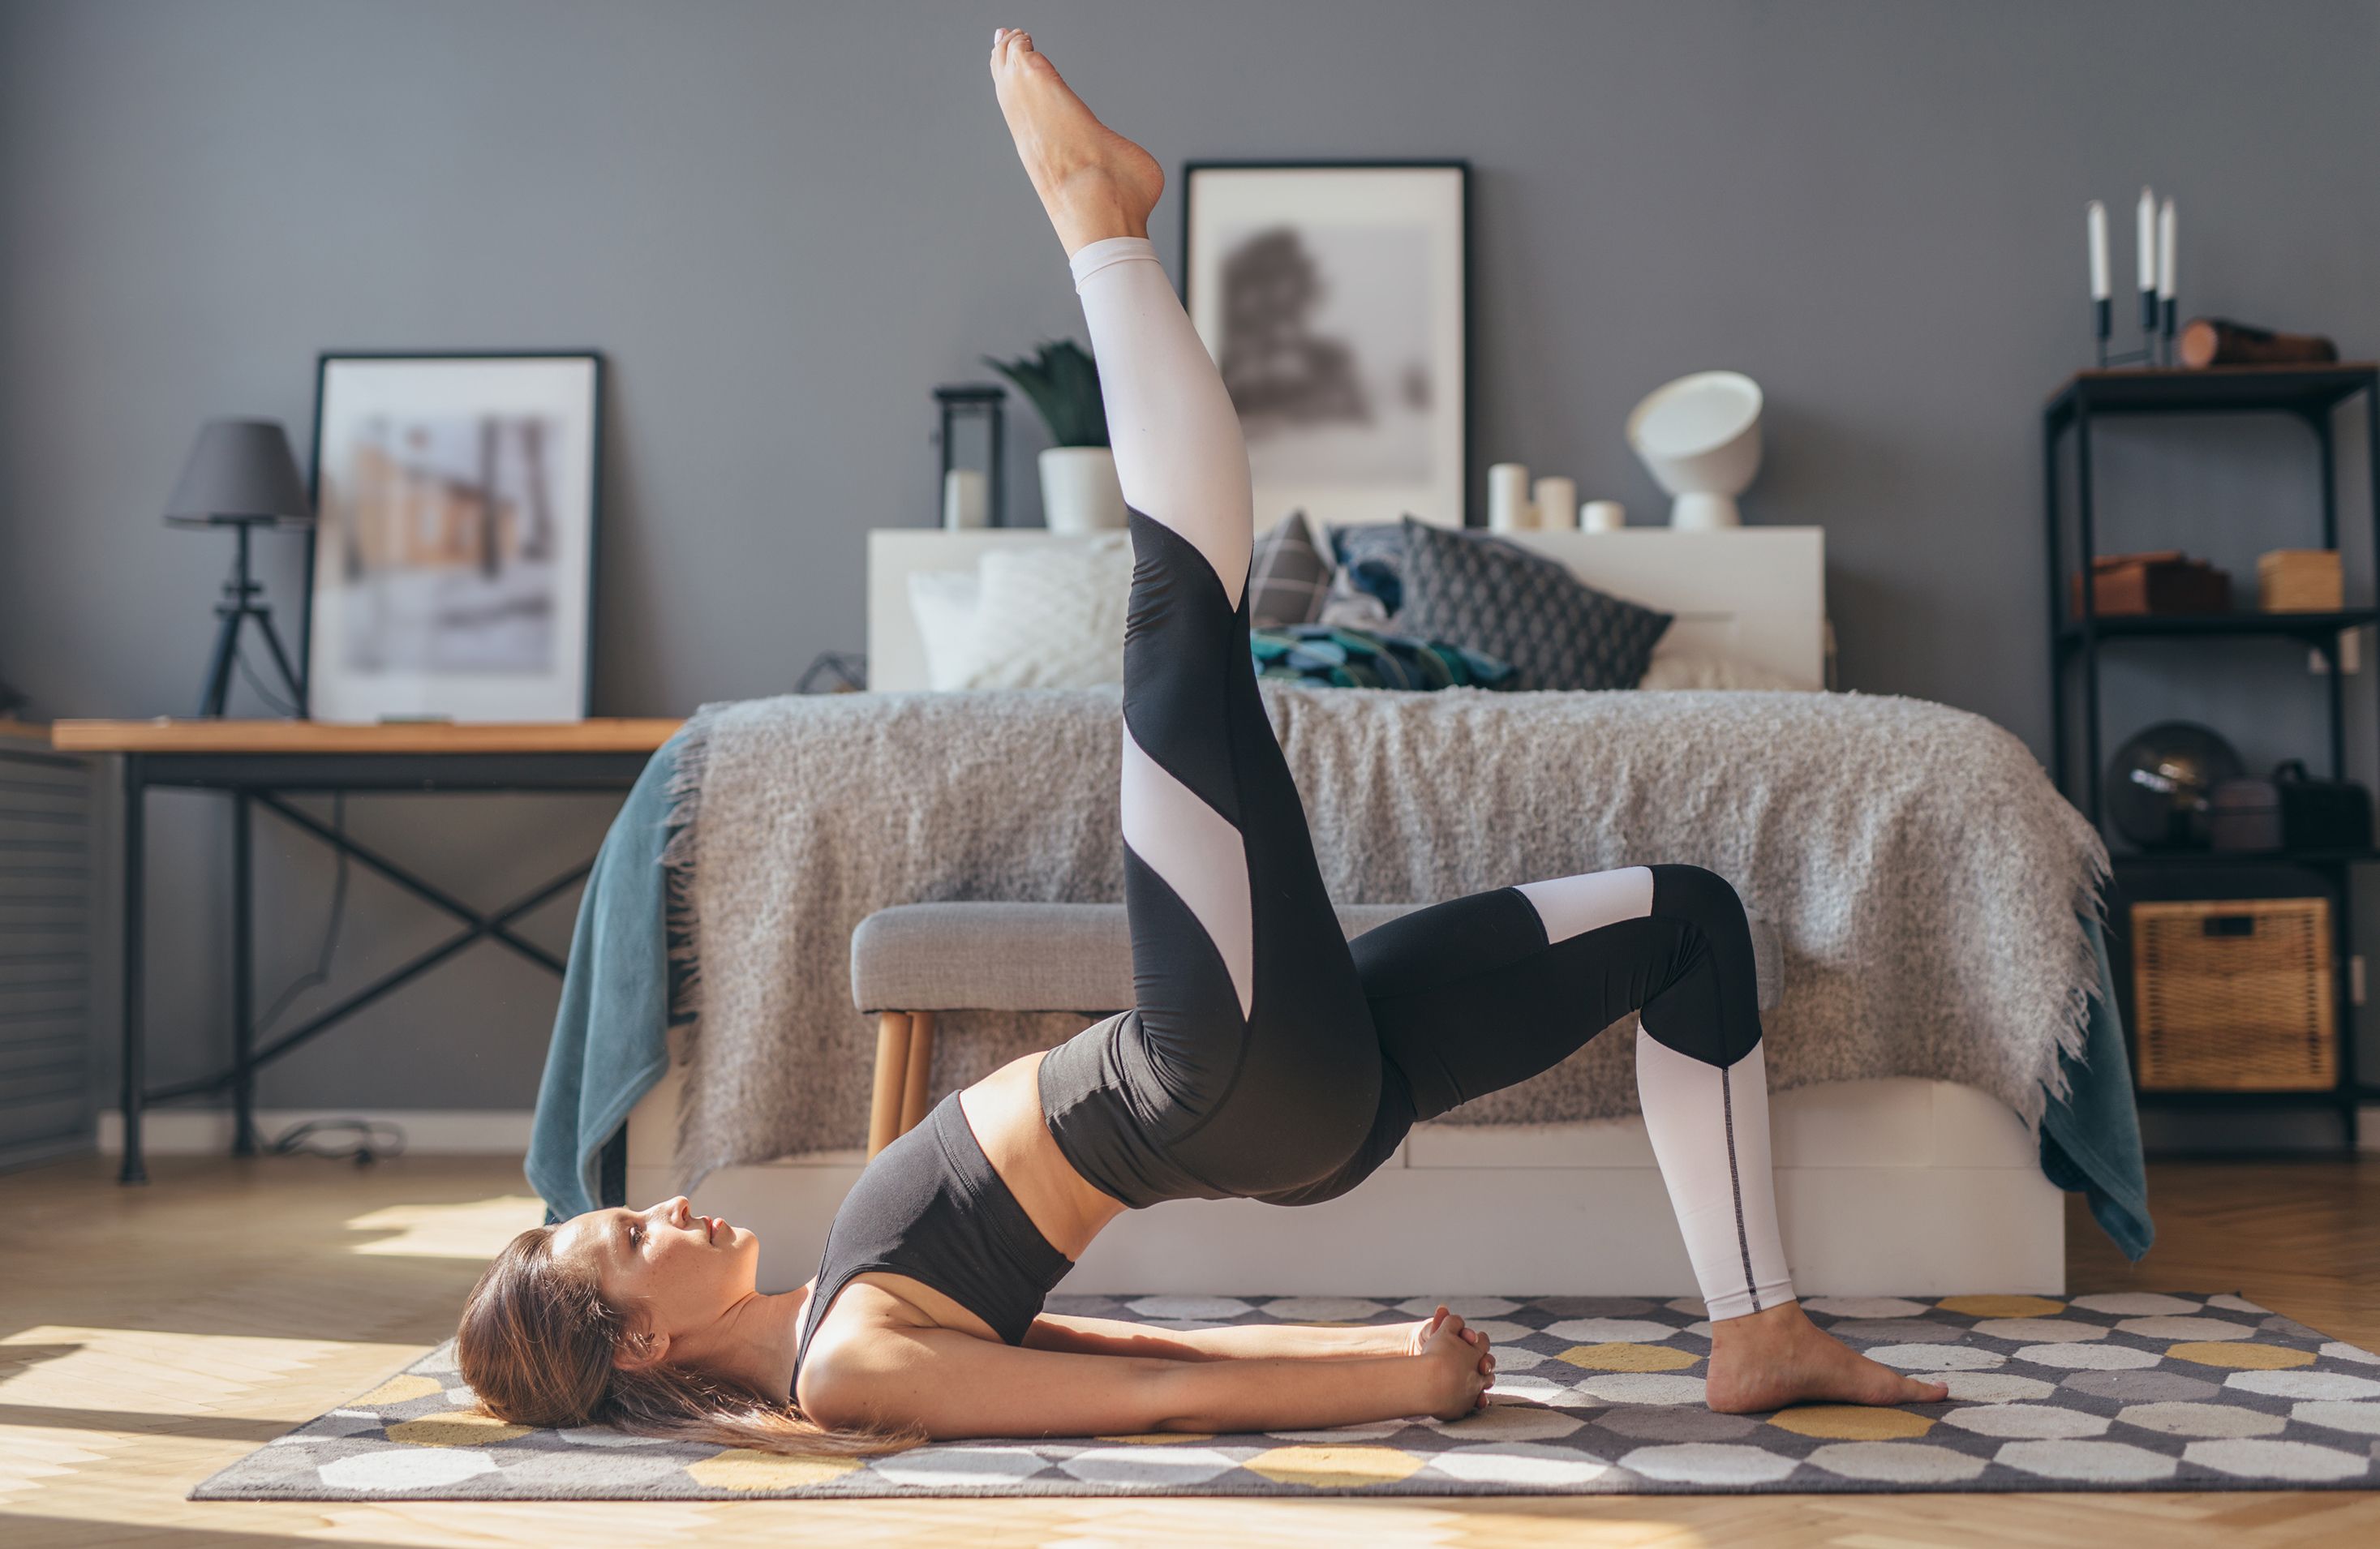 8 best stretches for tight hamstrings